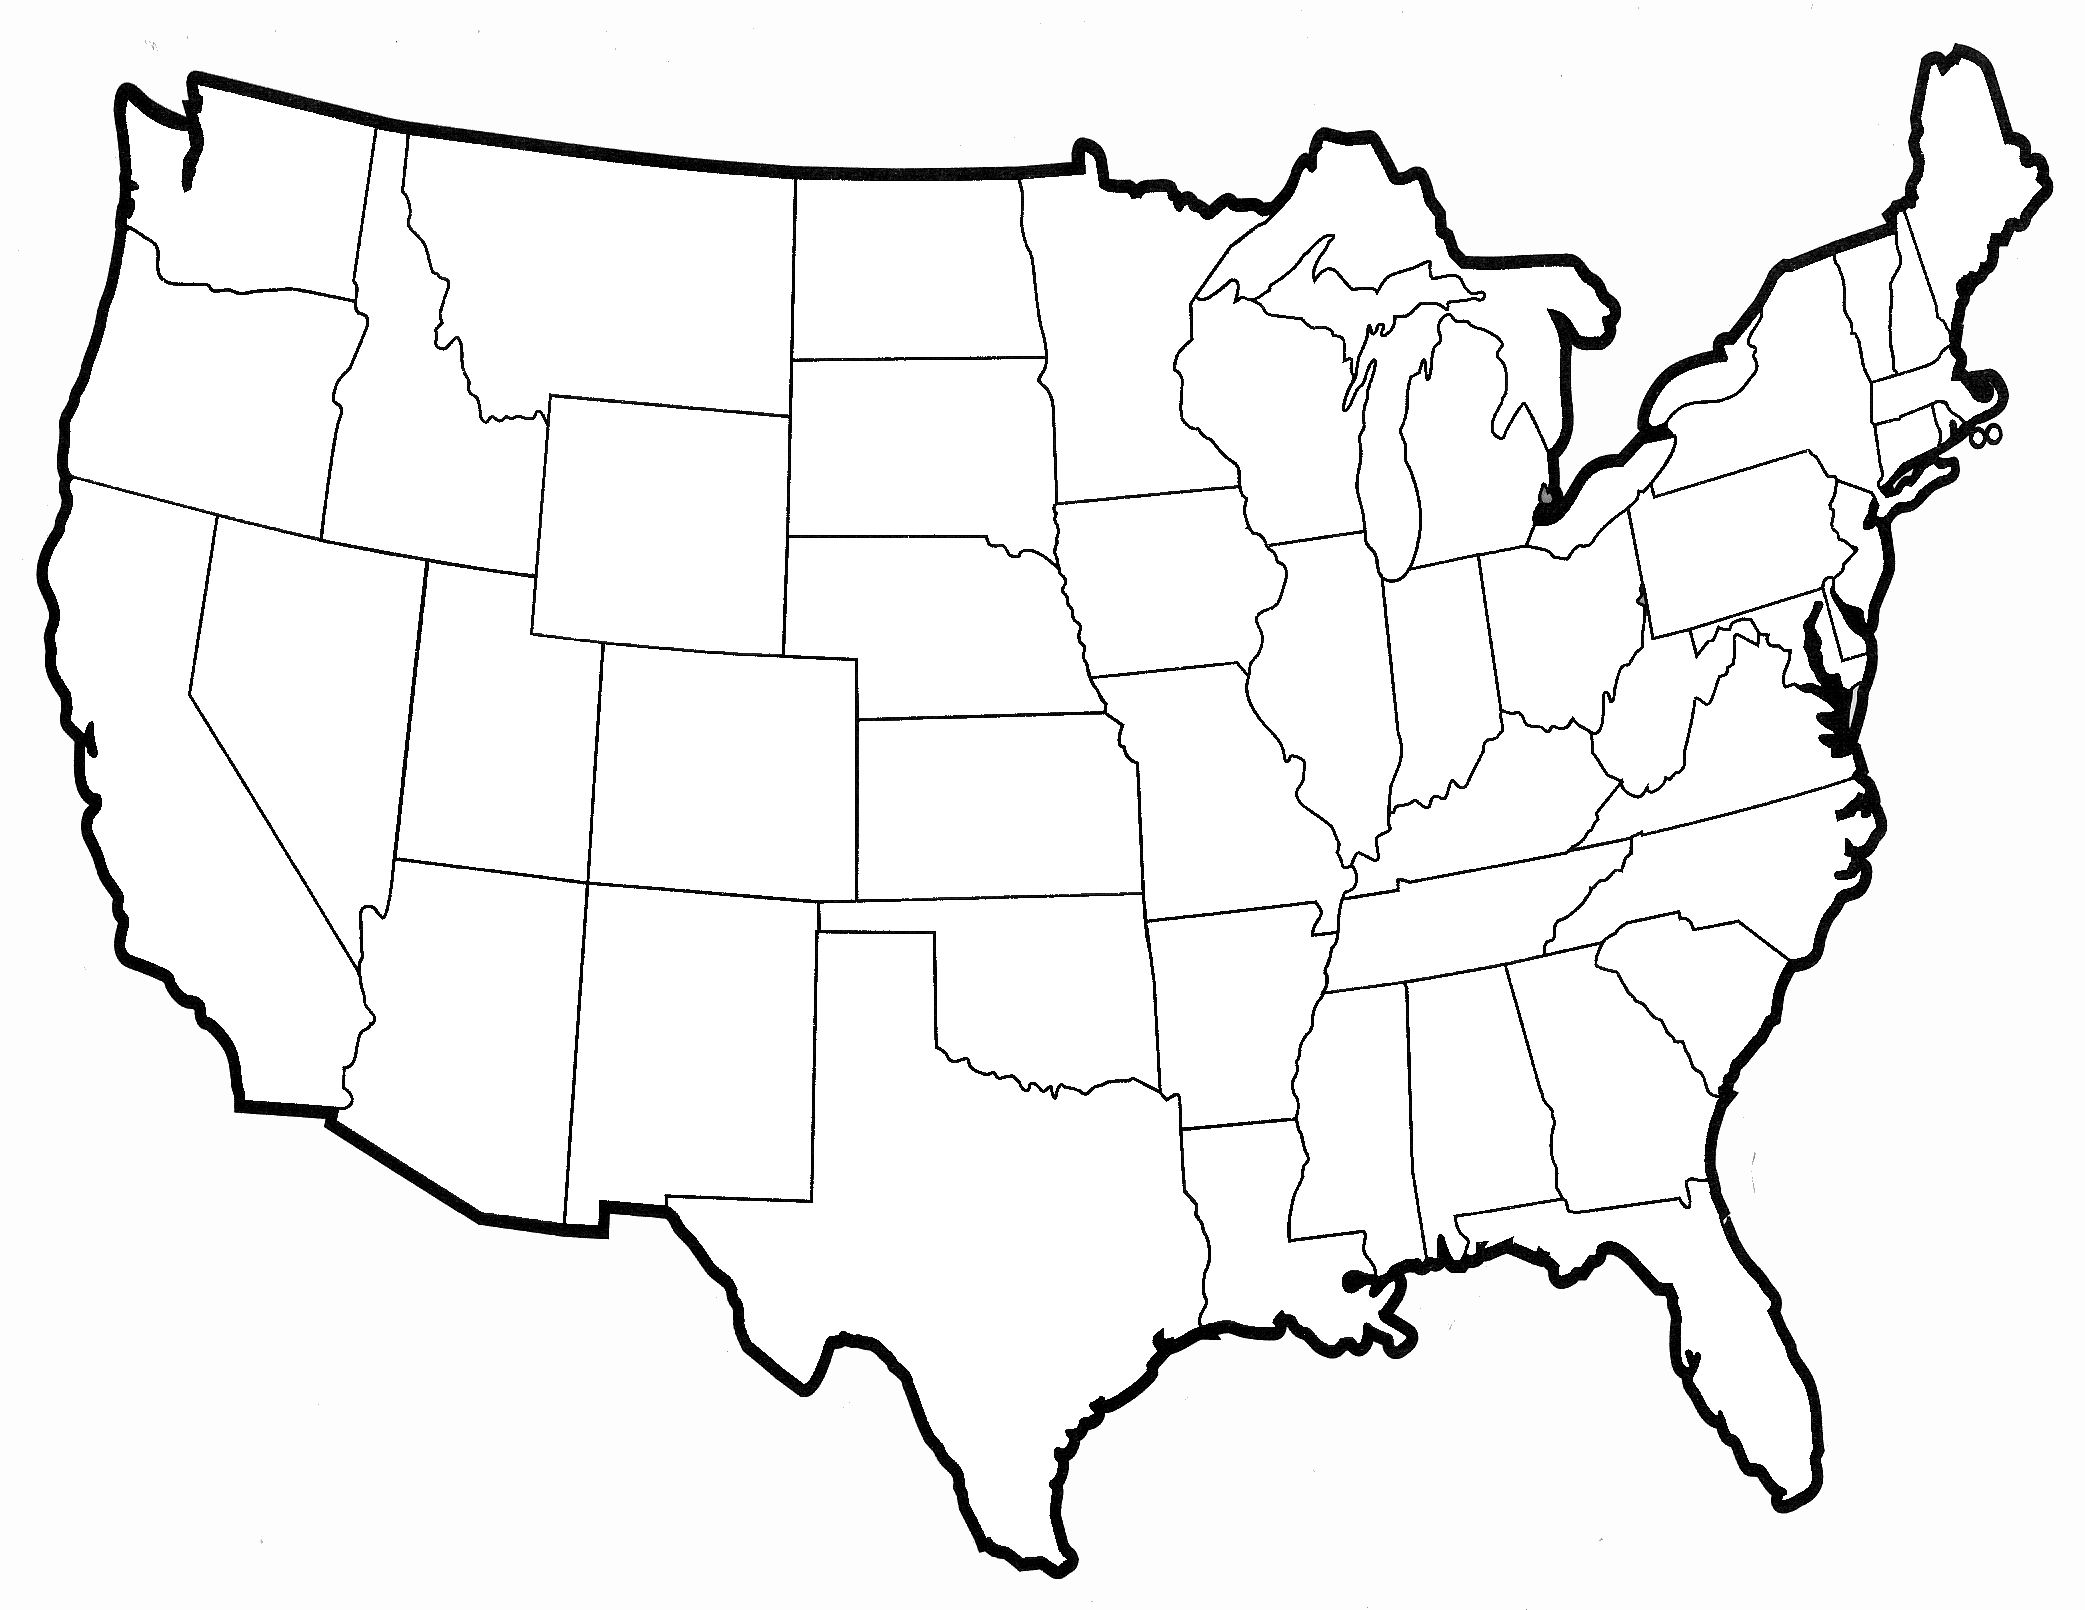 Guess the US States